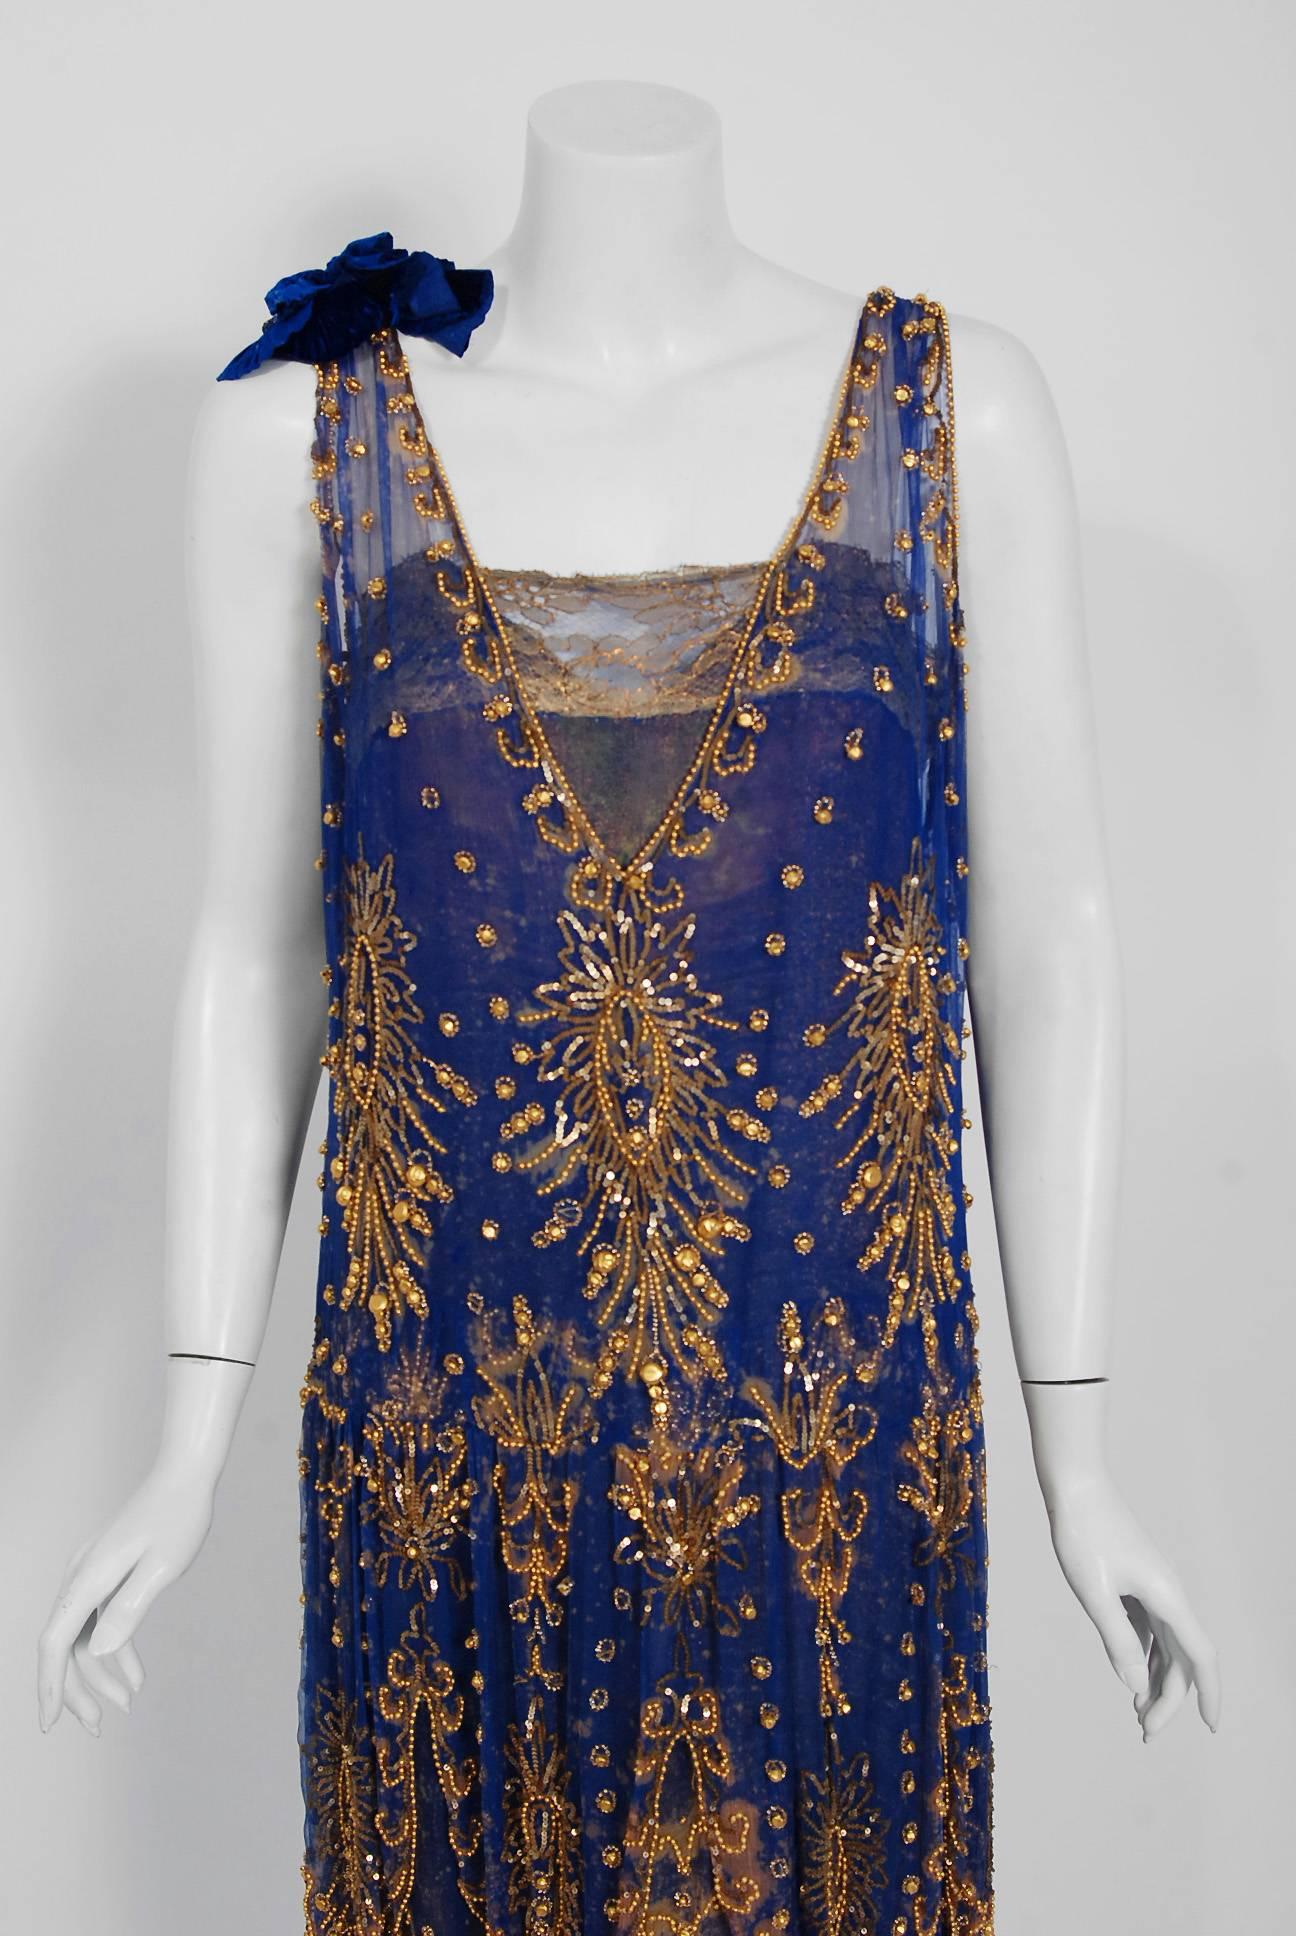 Undiminished by time, this 1920's royal-blue and gold dance dress still casts its seductive spell. This exceptional Art Deco beauty is fashioned in three different French couture fabrics- sheer silk chiffon, metallic gold lace and lamé based